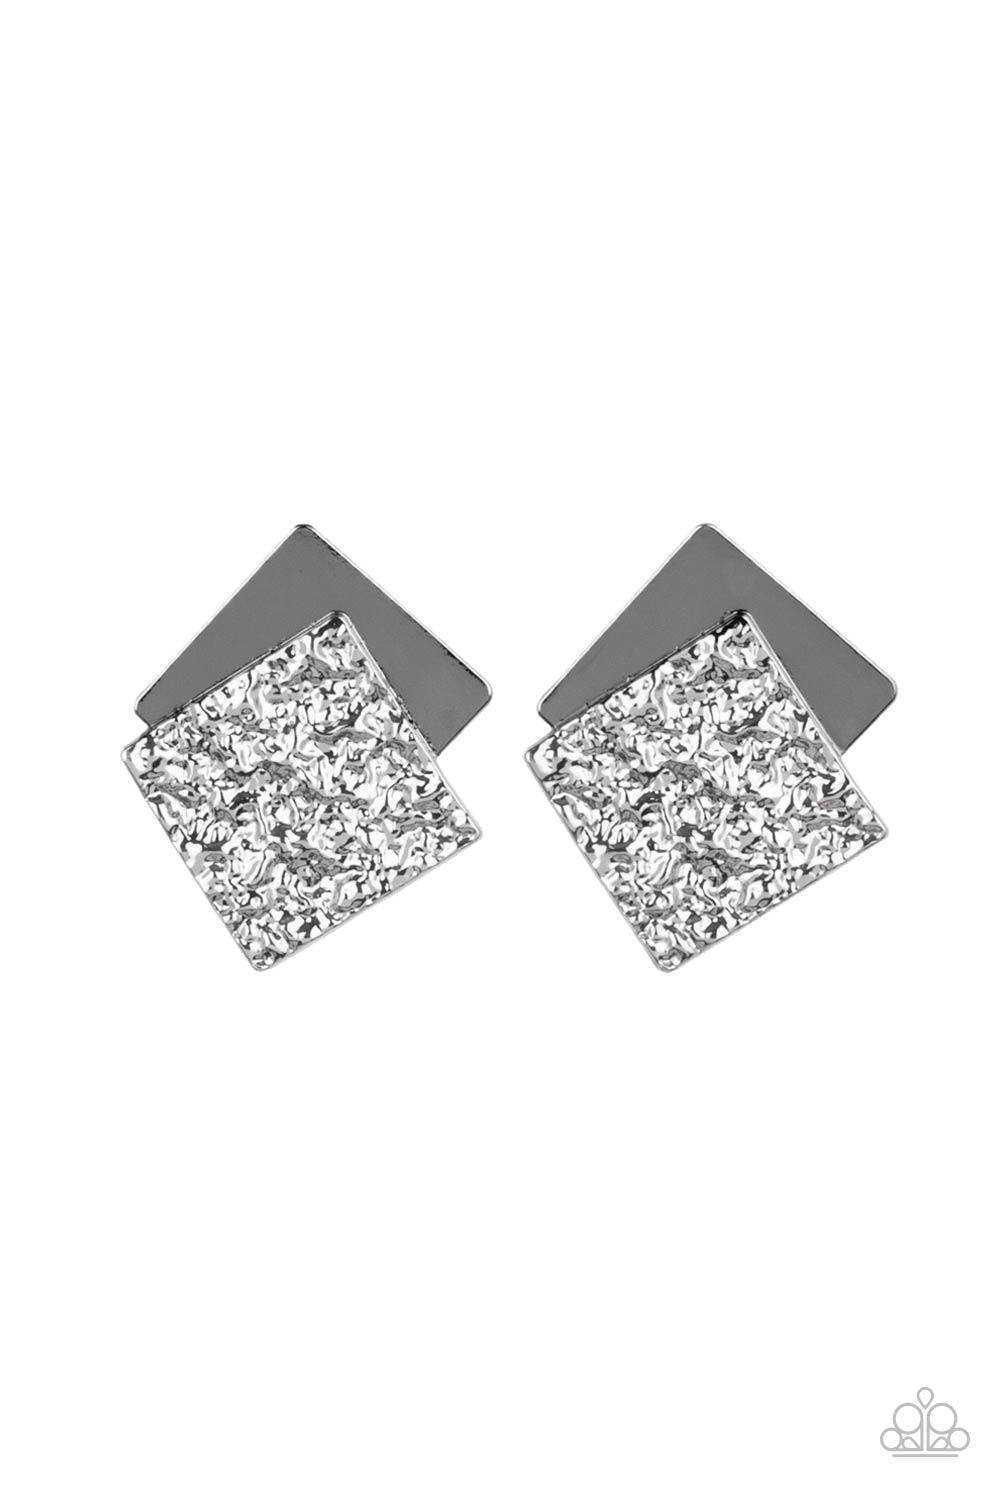 Paparazzi Accessories Square With Style - Black Embossed in gritty textures, a rough gunmetal square overlaps a plain gunmetal square, creating a stacked frame. Earring attaches to a standard post fitting. Sold as one pair of post earrings. Jewelry